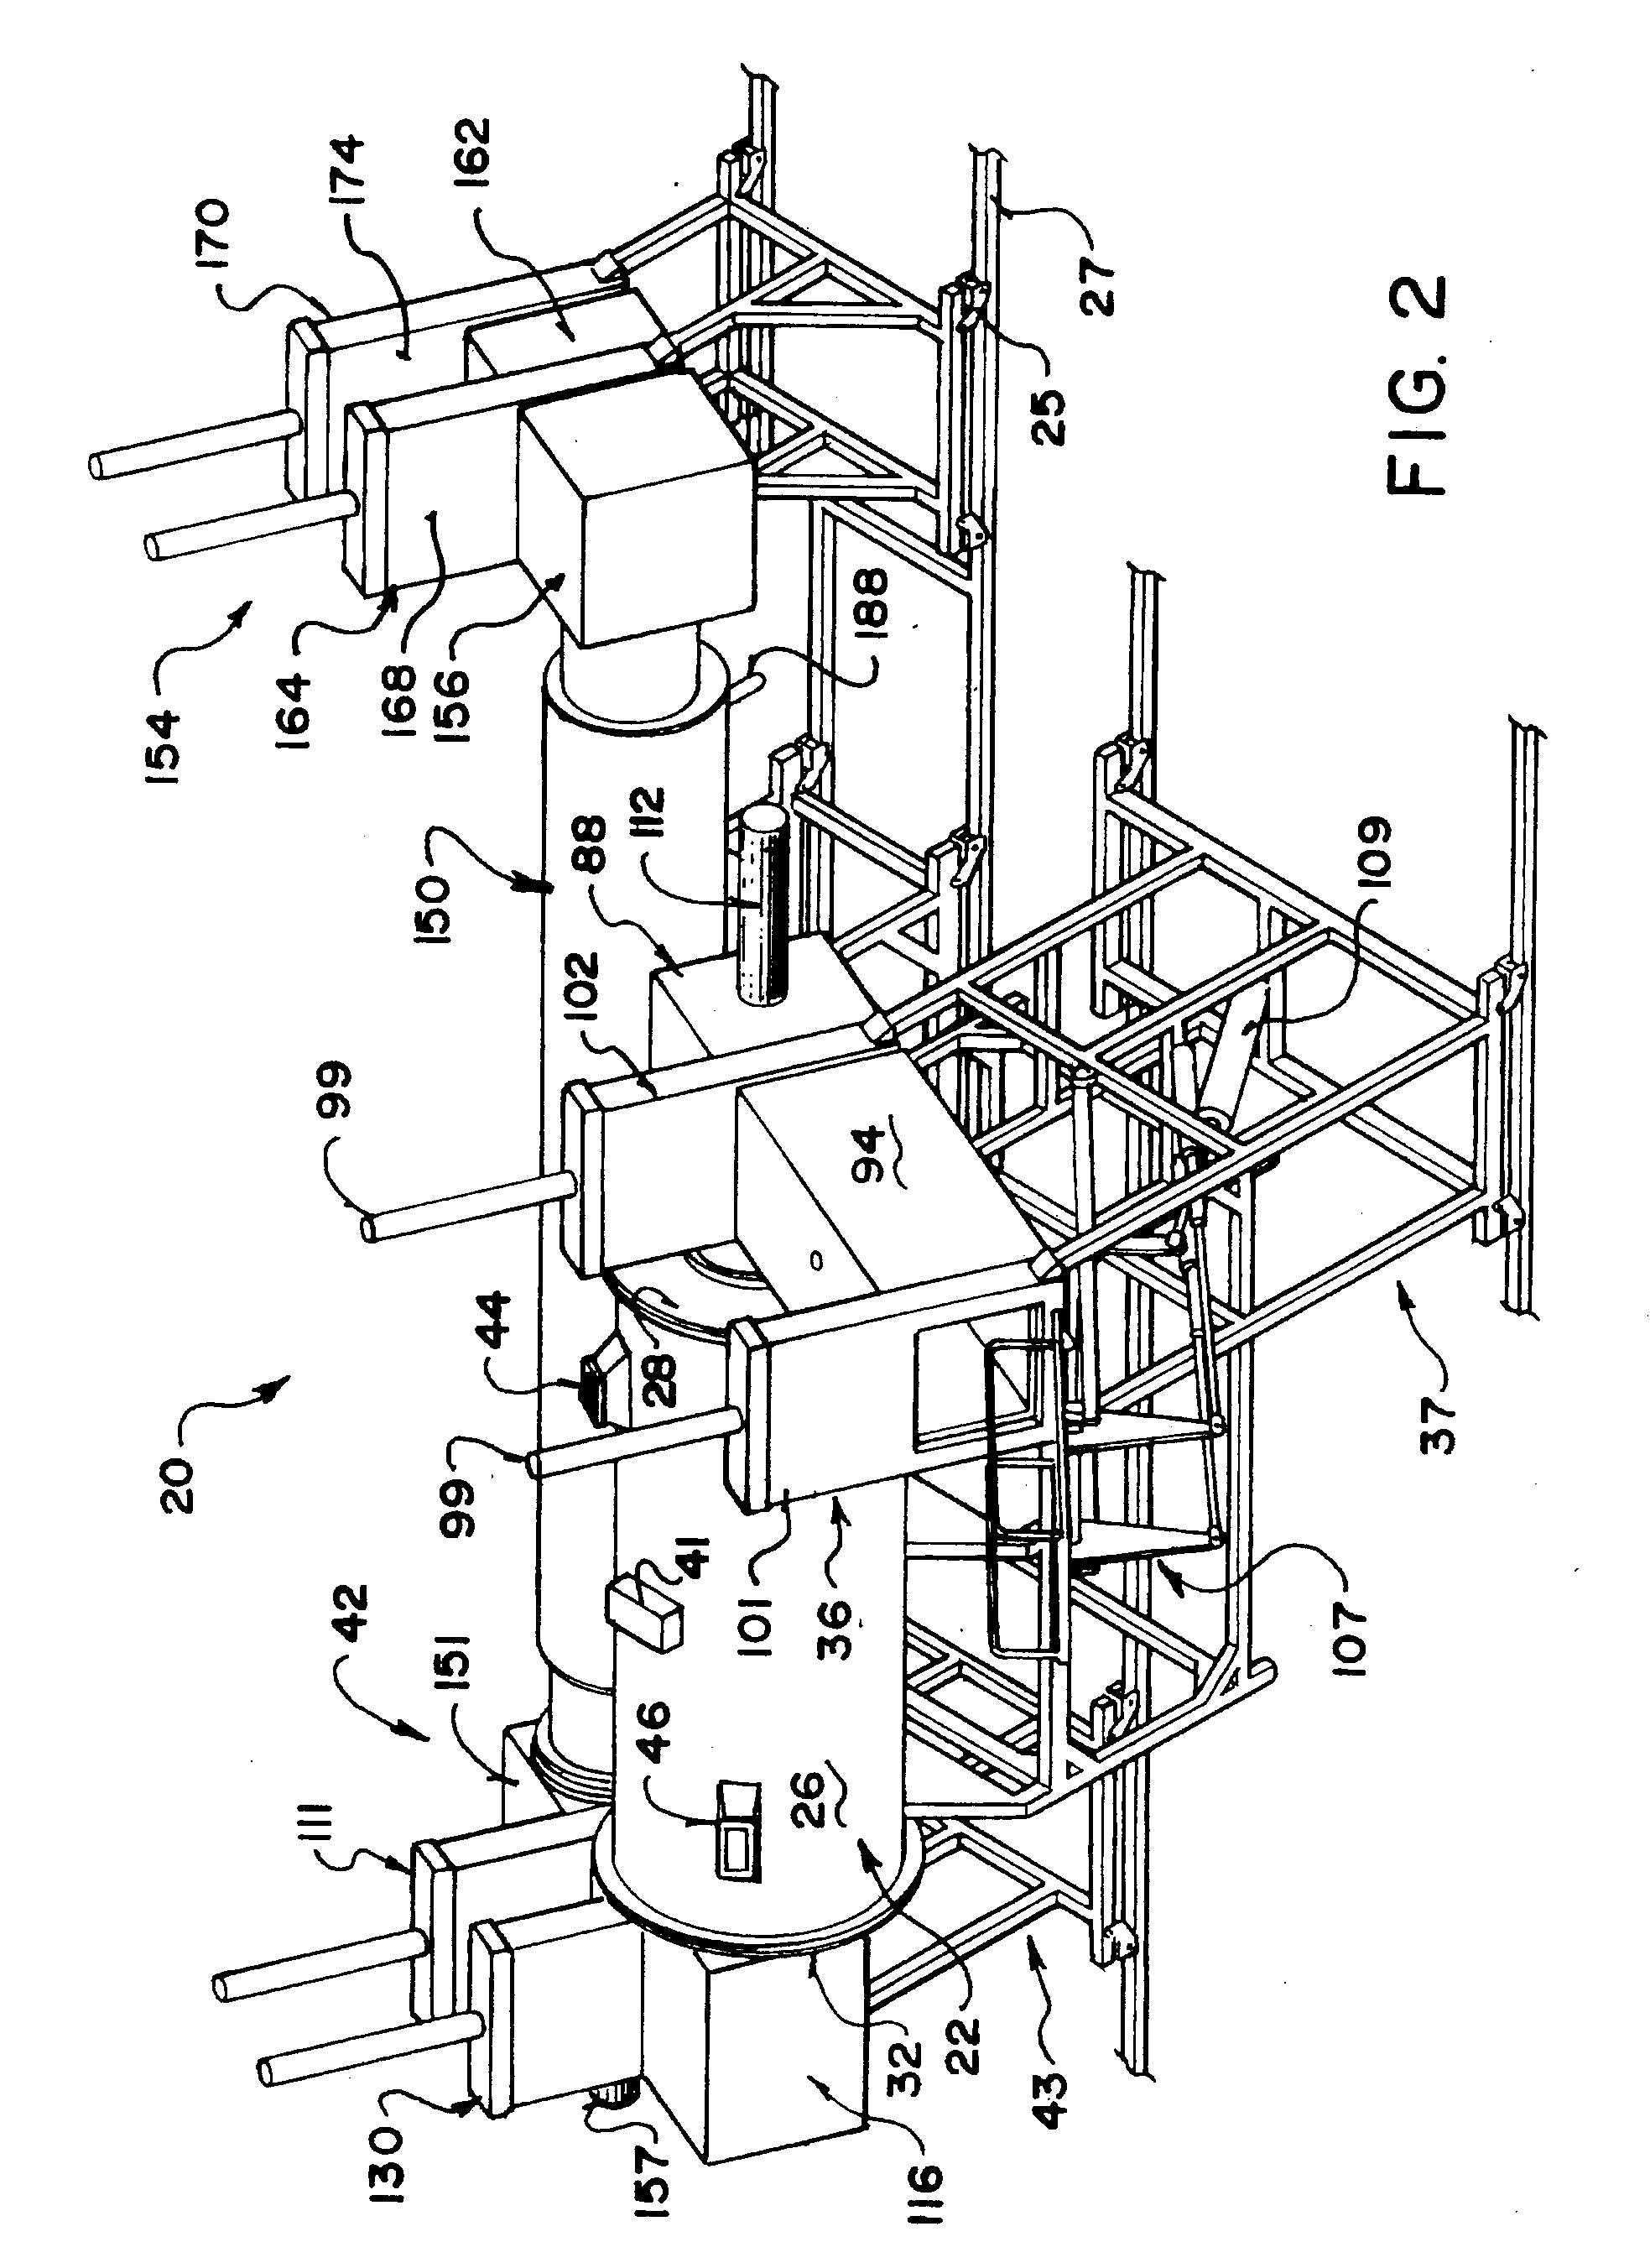 Apparatus and method for microwave vacuum-drying of organic materials